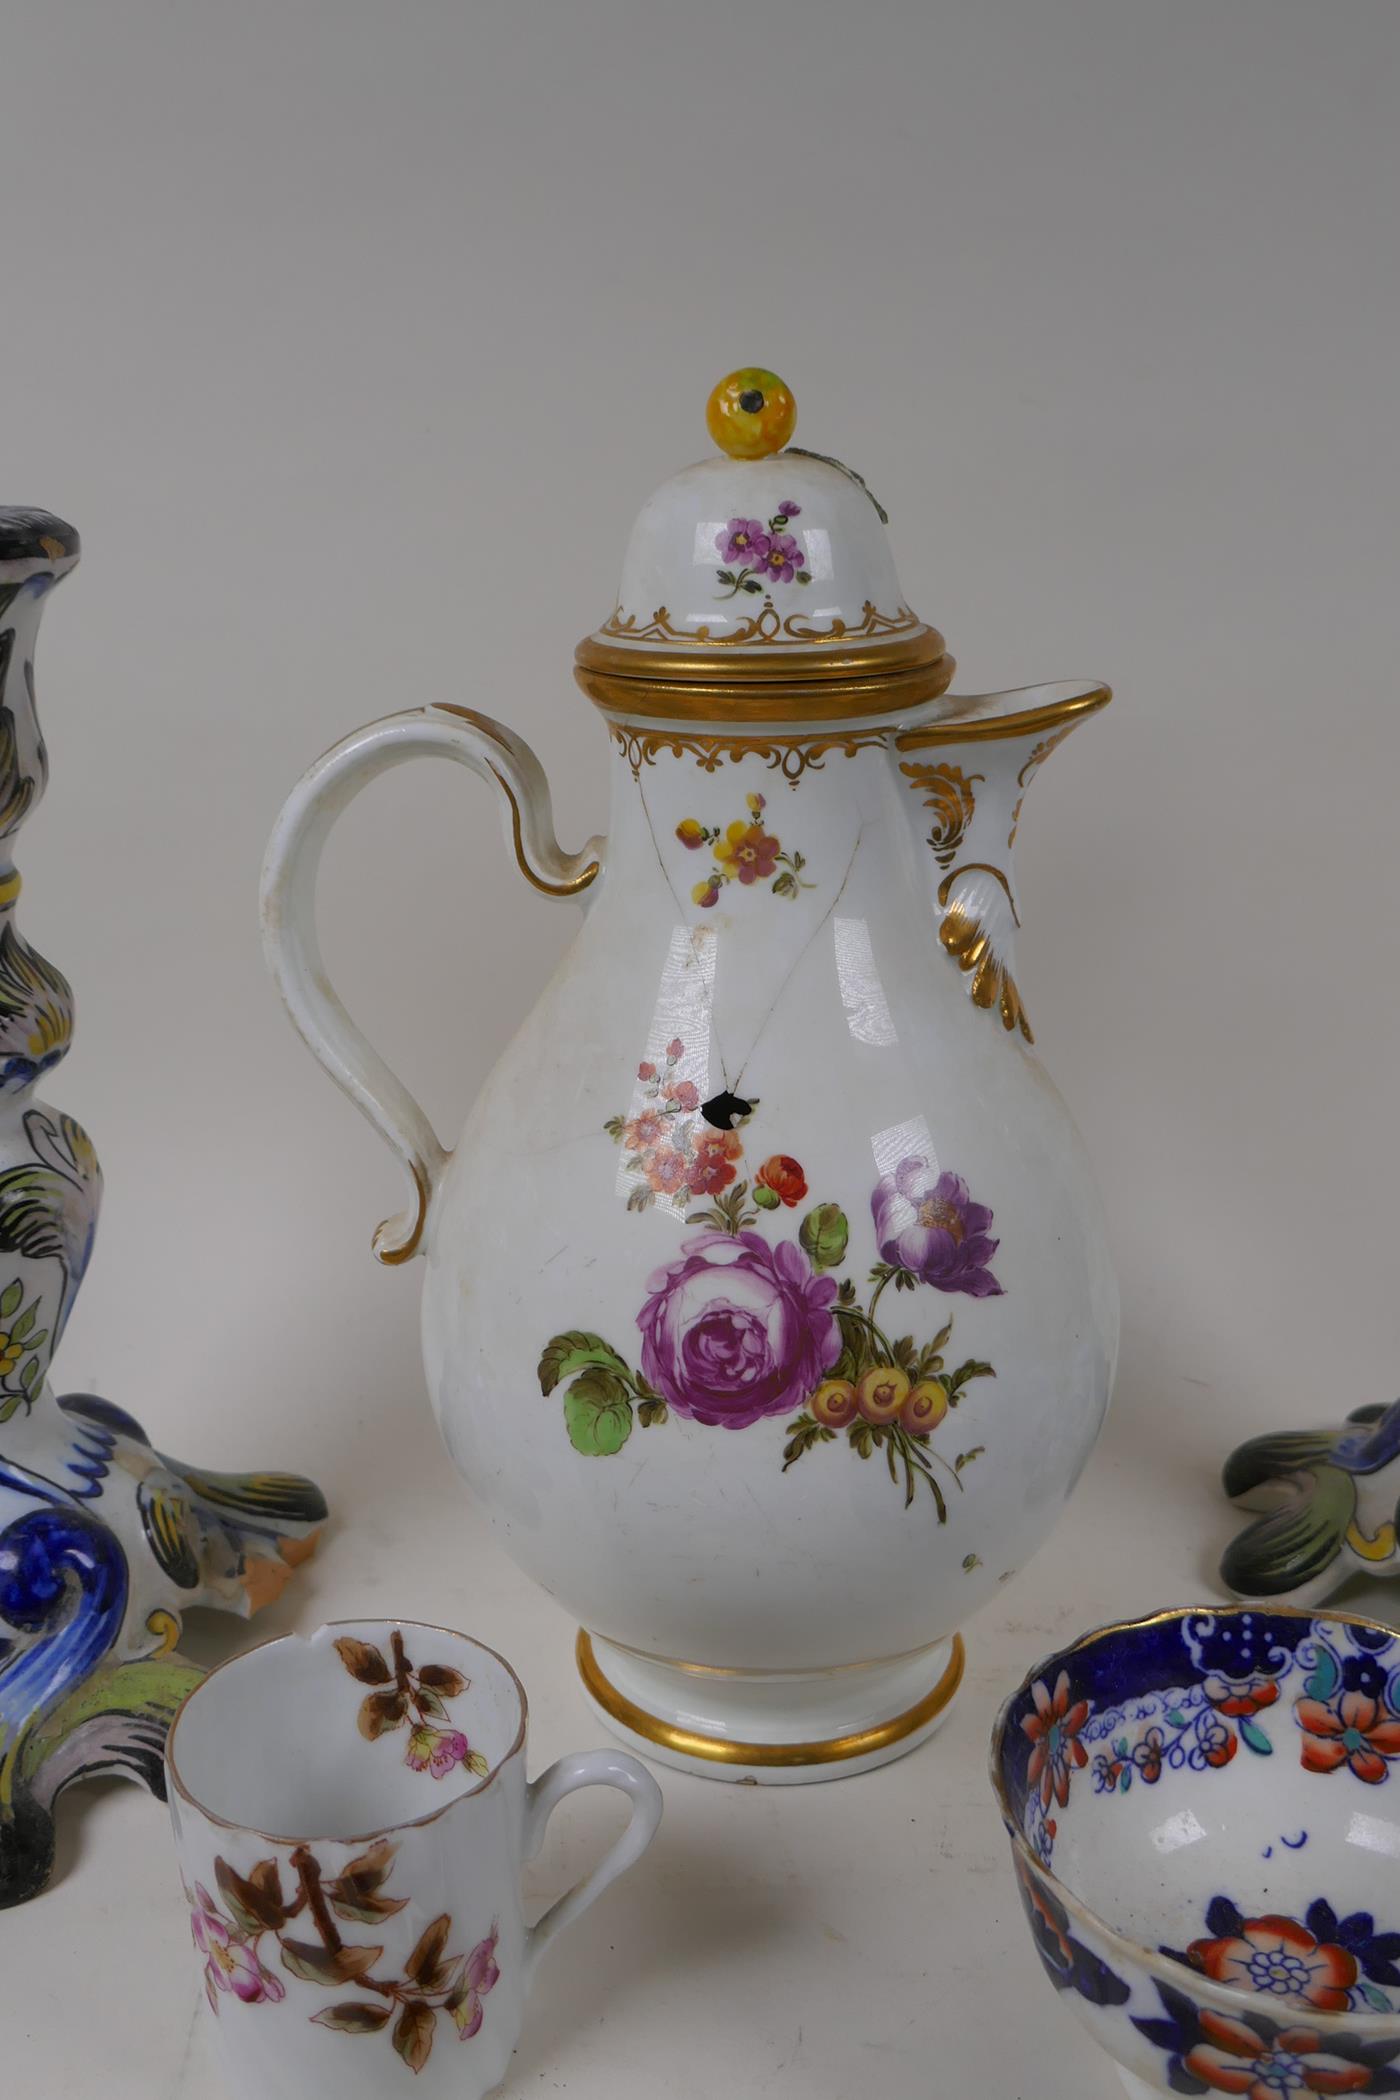 A quantity of C19th and early C20th British and Continental porcelain items including cups, saucers, - Image 3 of 9